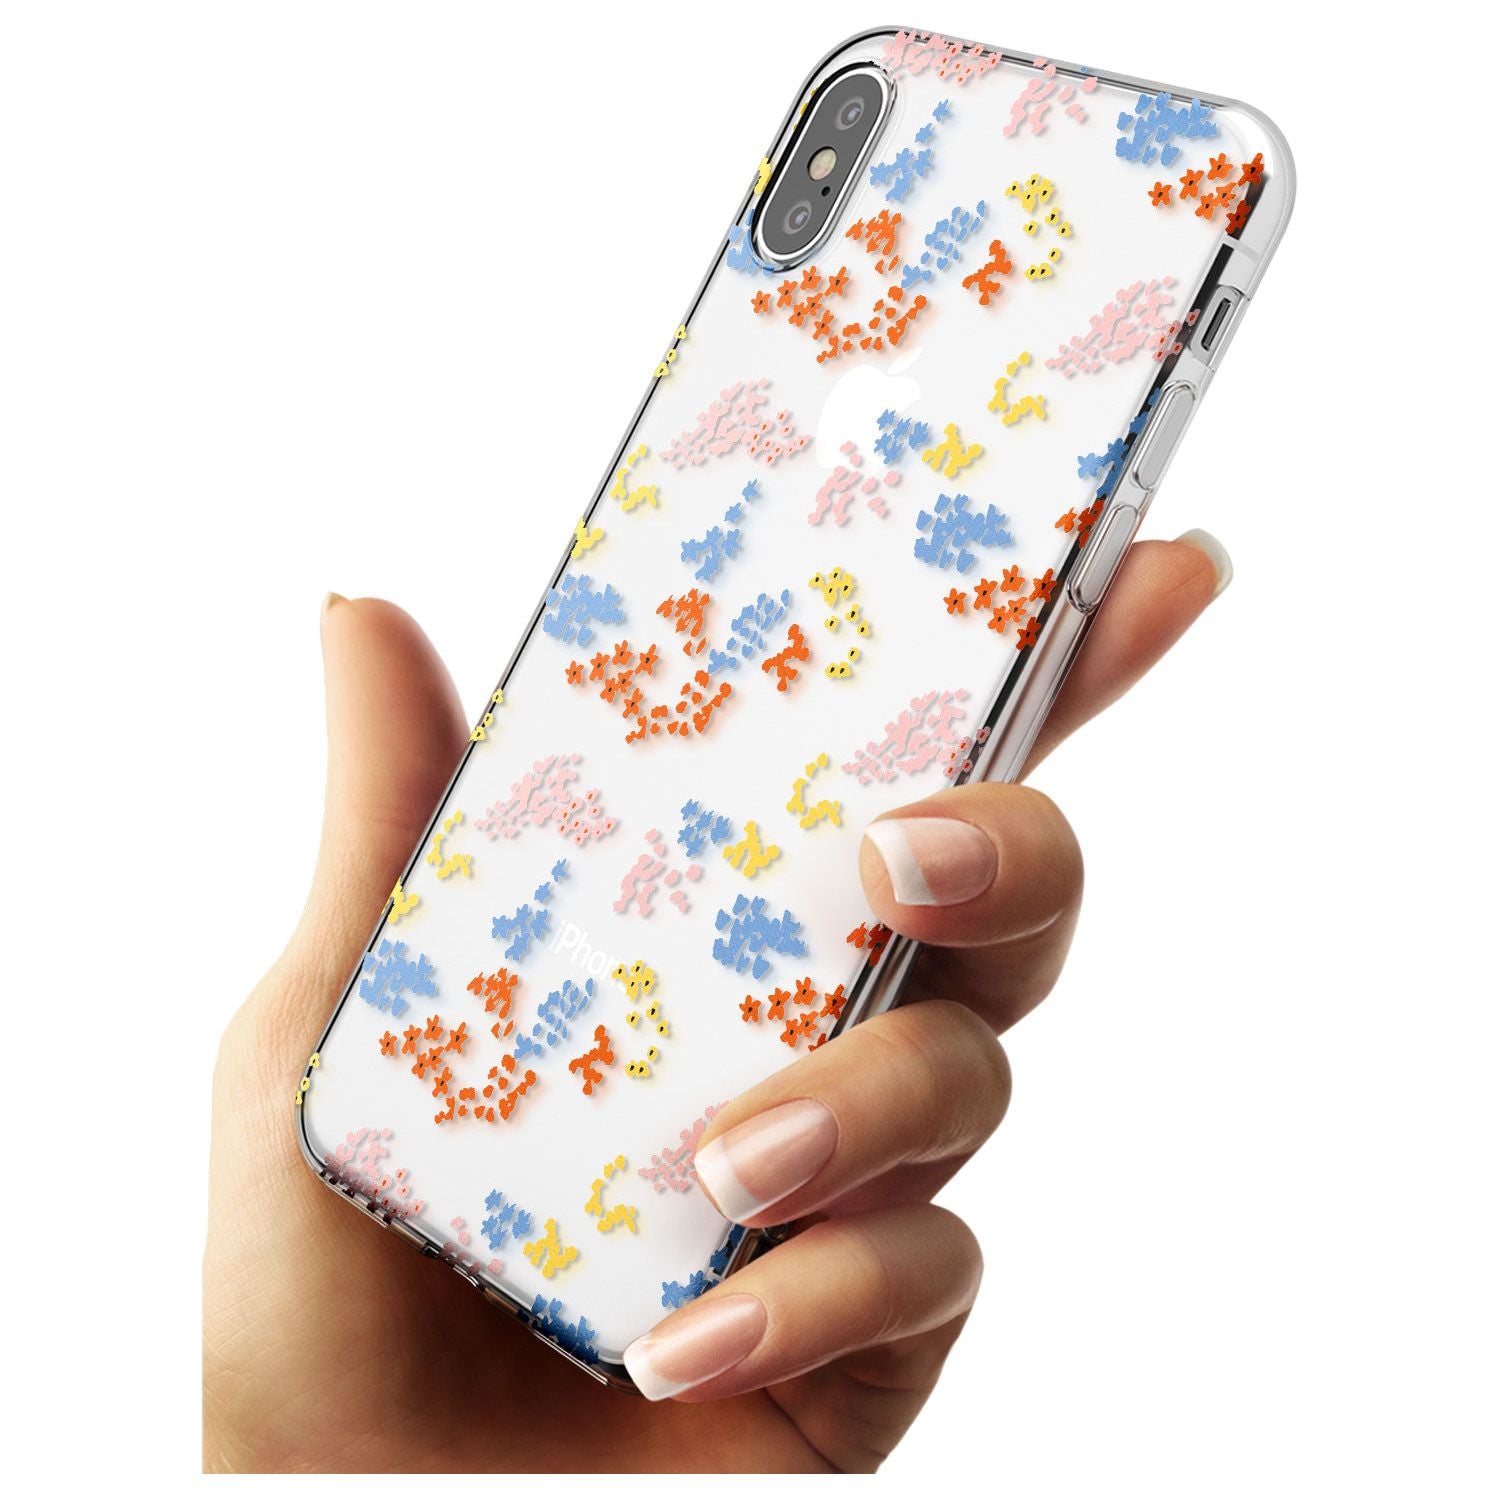 Small Flower Mix: Transparent Black Impact Phone Case for iPhone X XS Max XR